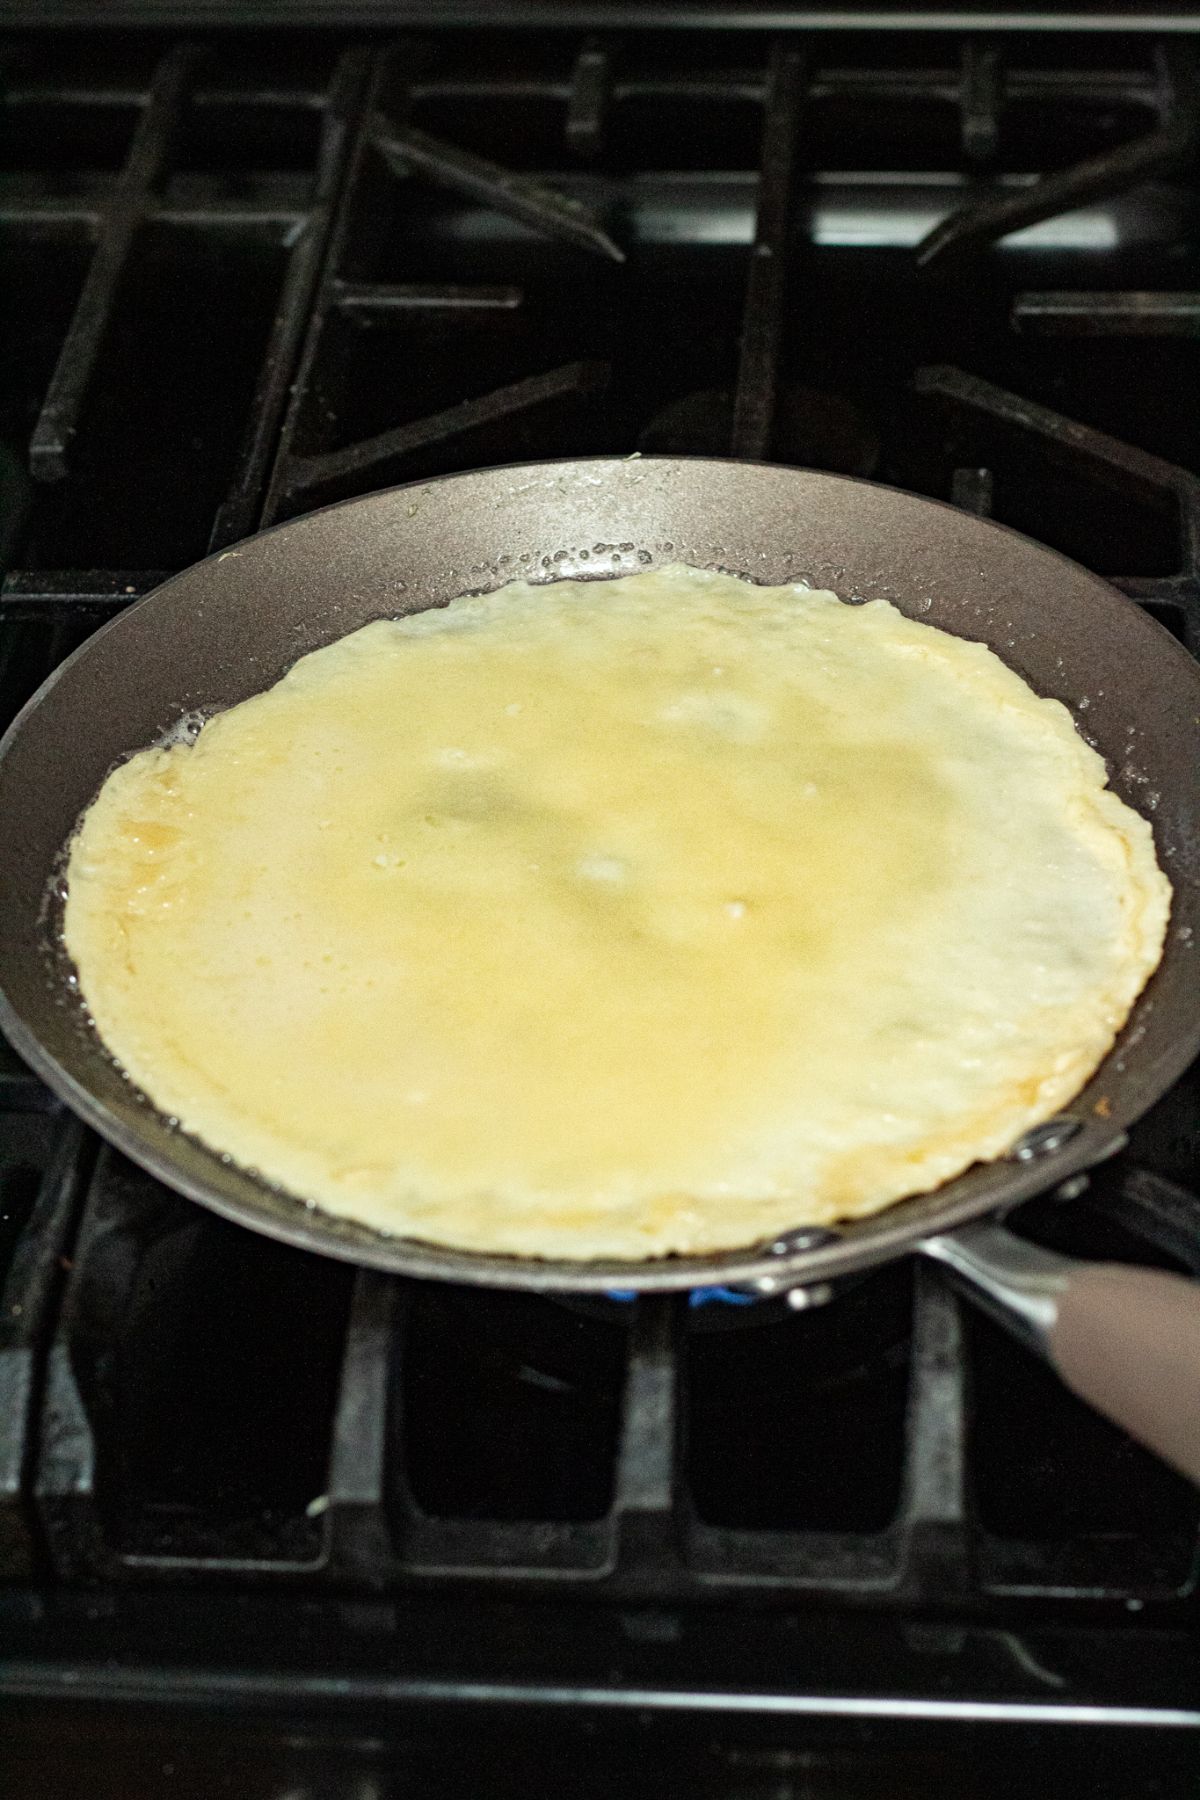 The batter being cooked on the skillet to make crepes.